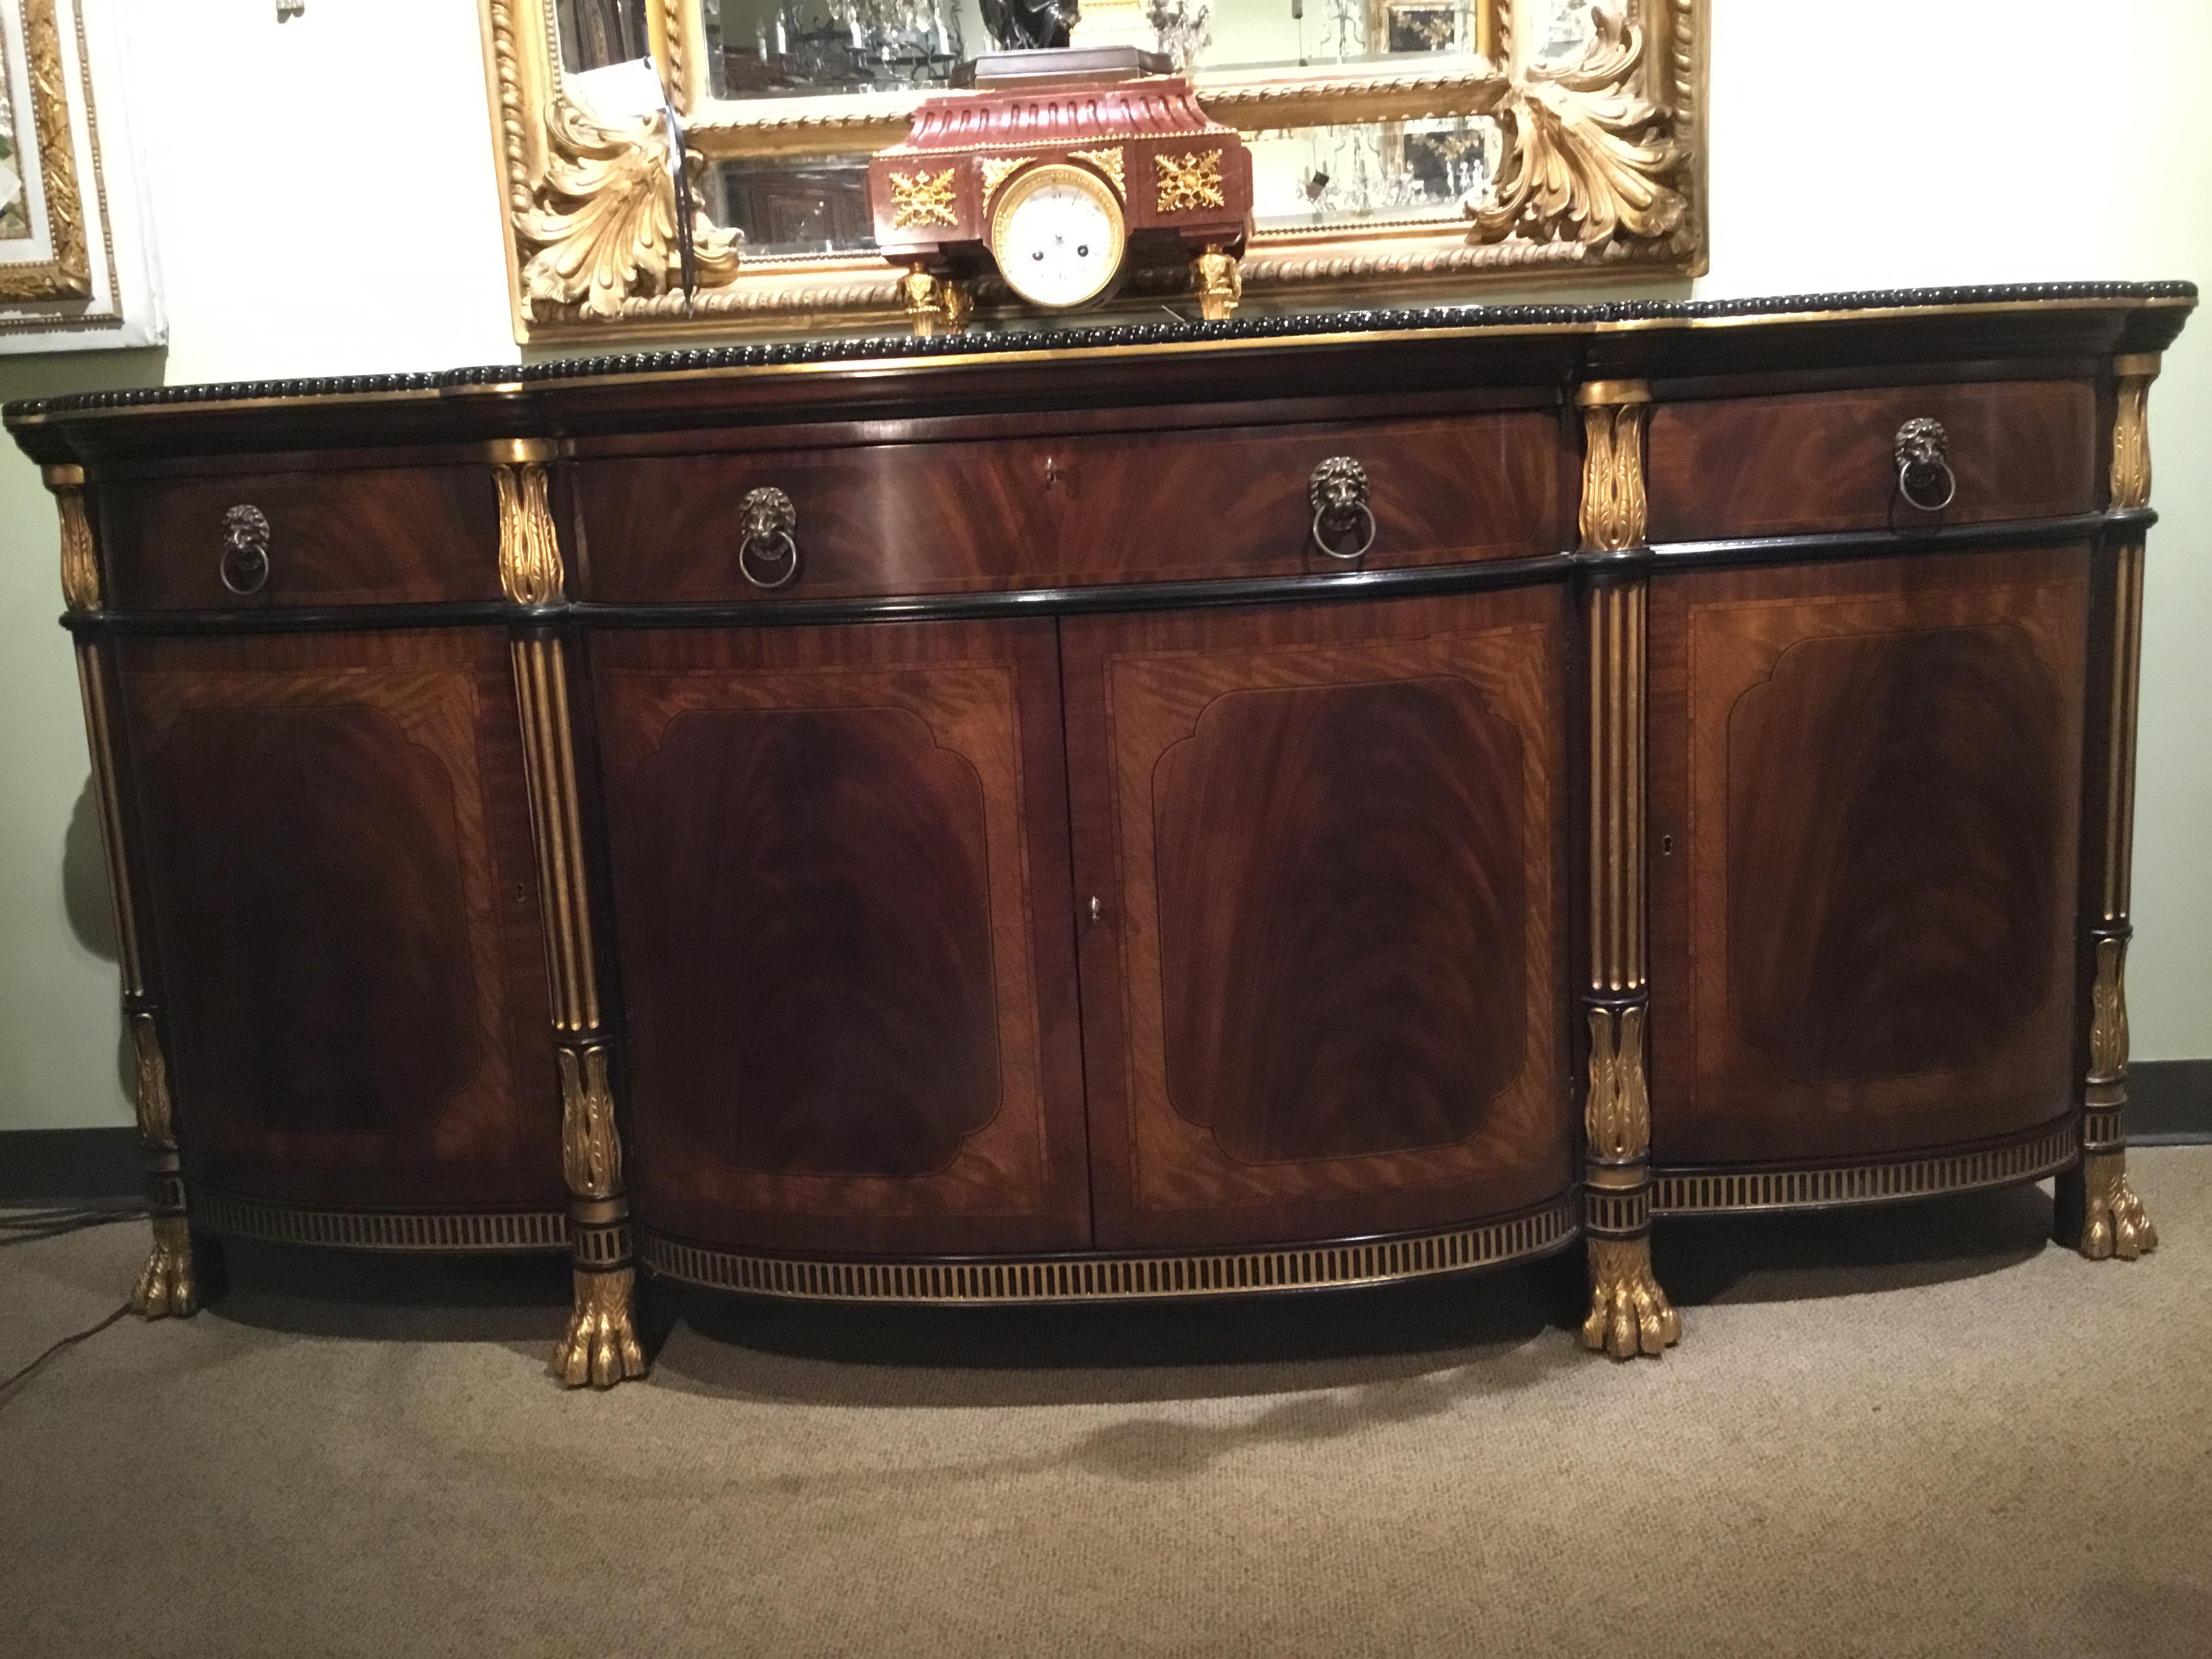 French Regency Style Buffet/Sideboard, Mahogany Woods and Veneers, Gilt Trim 4